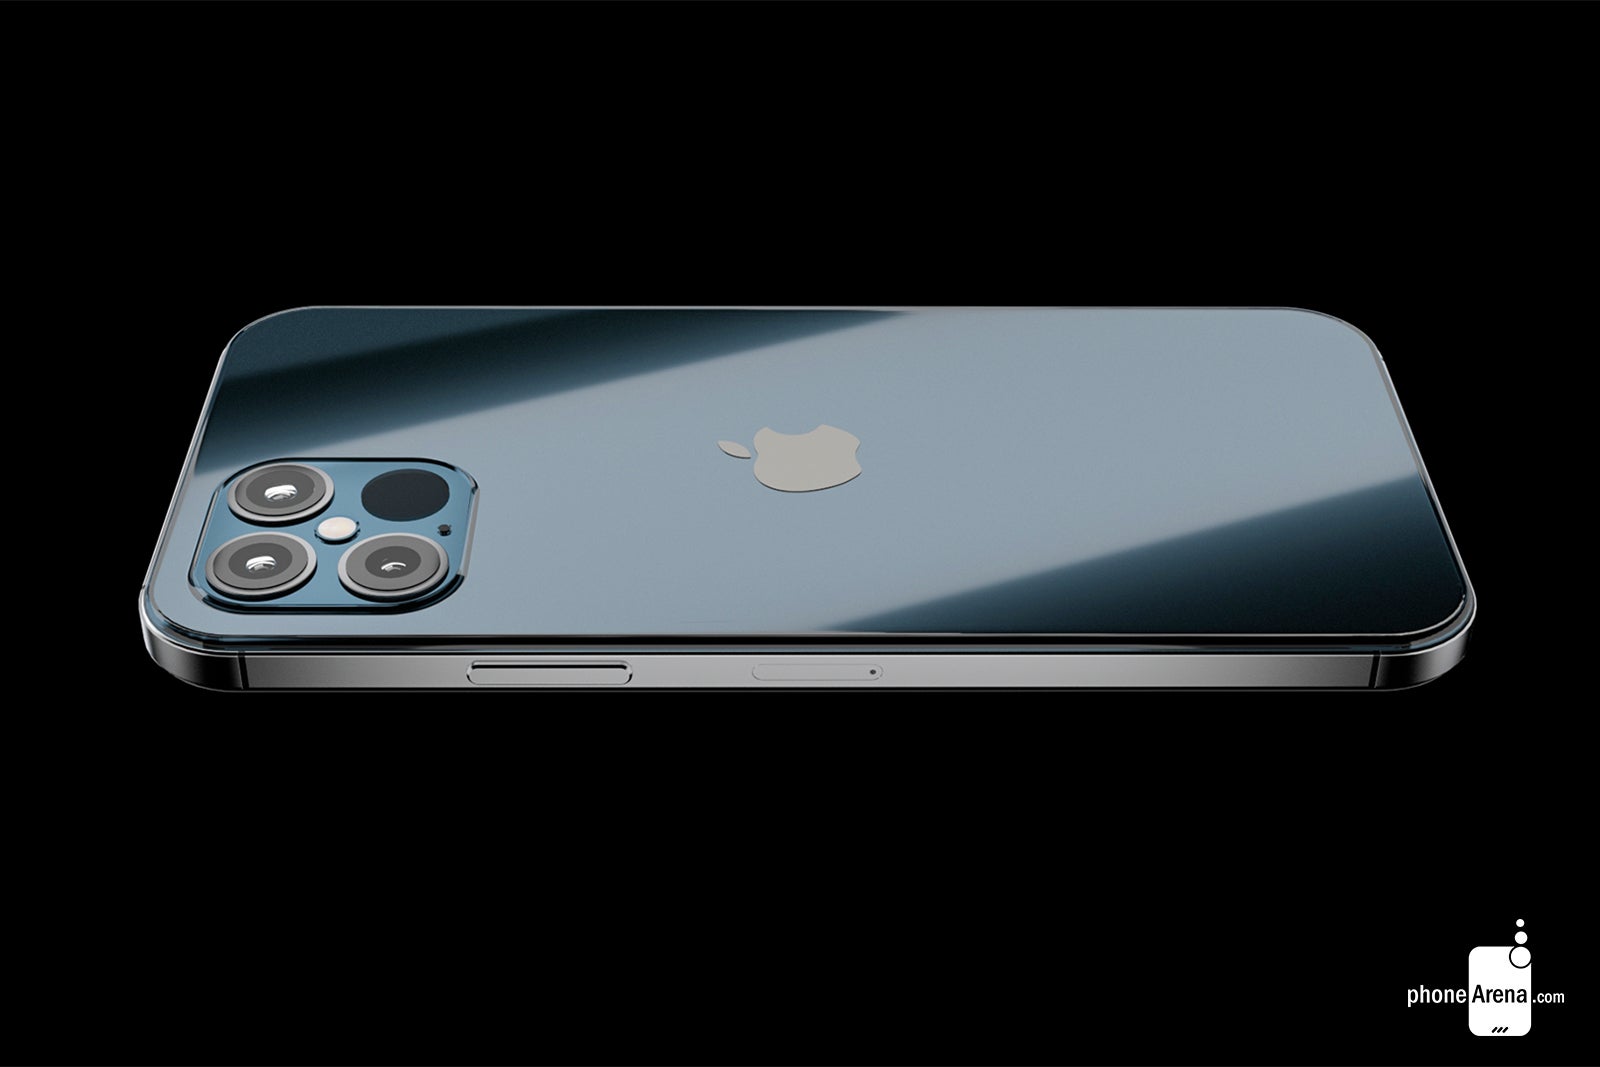 Apple iPhone 12 Pro/Max concept render - More iPhone 12 5G details leak ahead of possible event date reveal next Tuesday